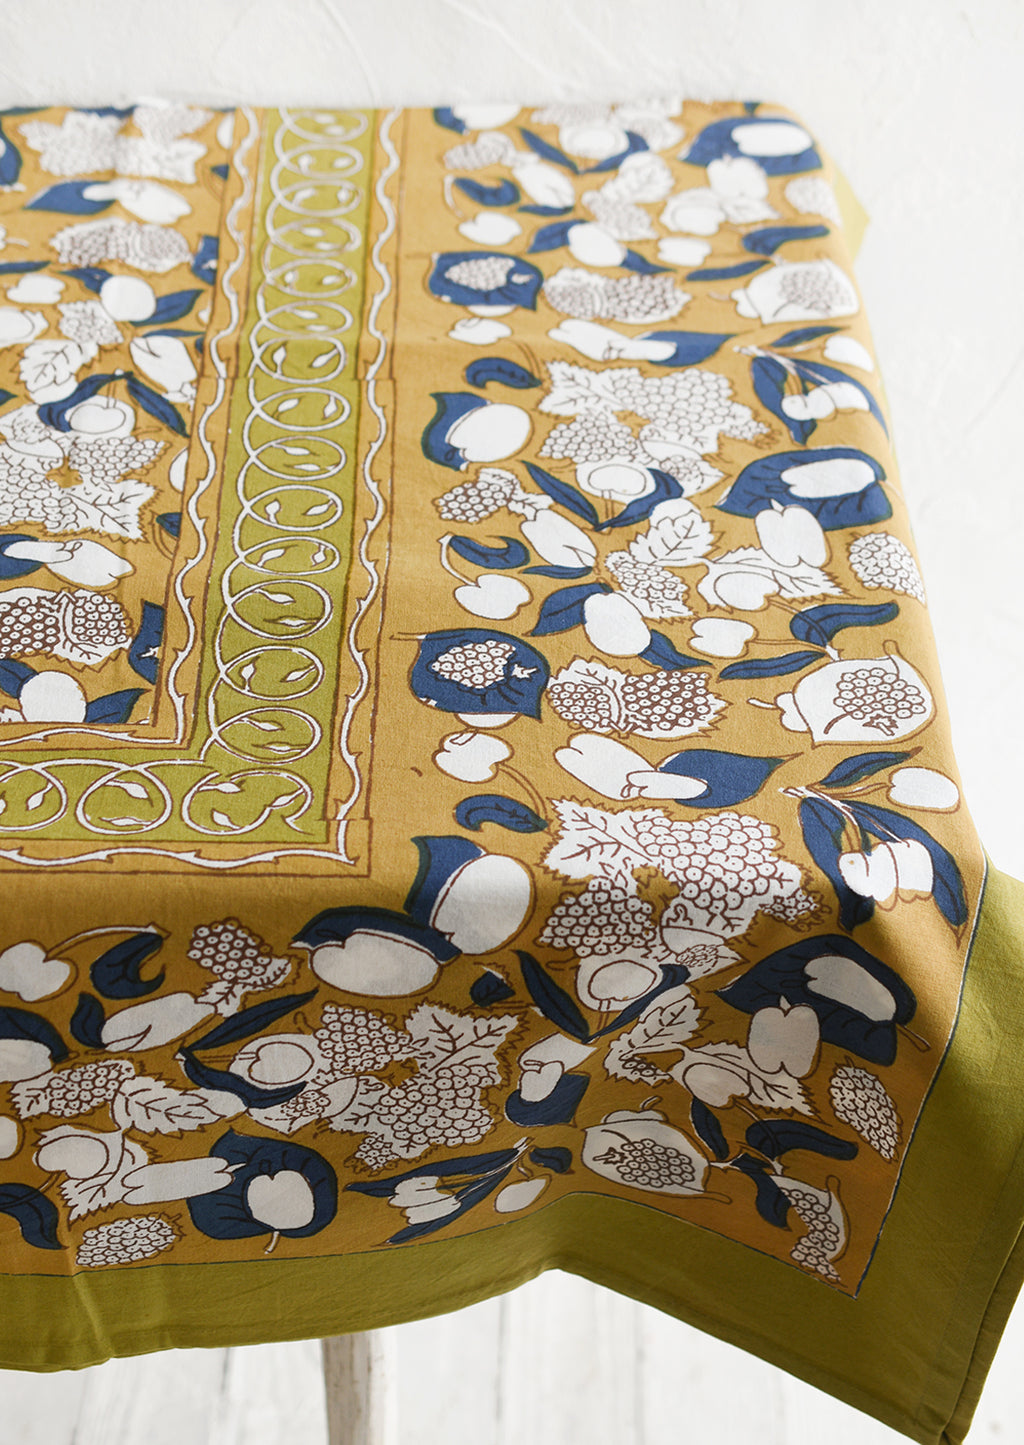 2: A tablecloth in ochre, navy and chartreuse floral and fruit print.